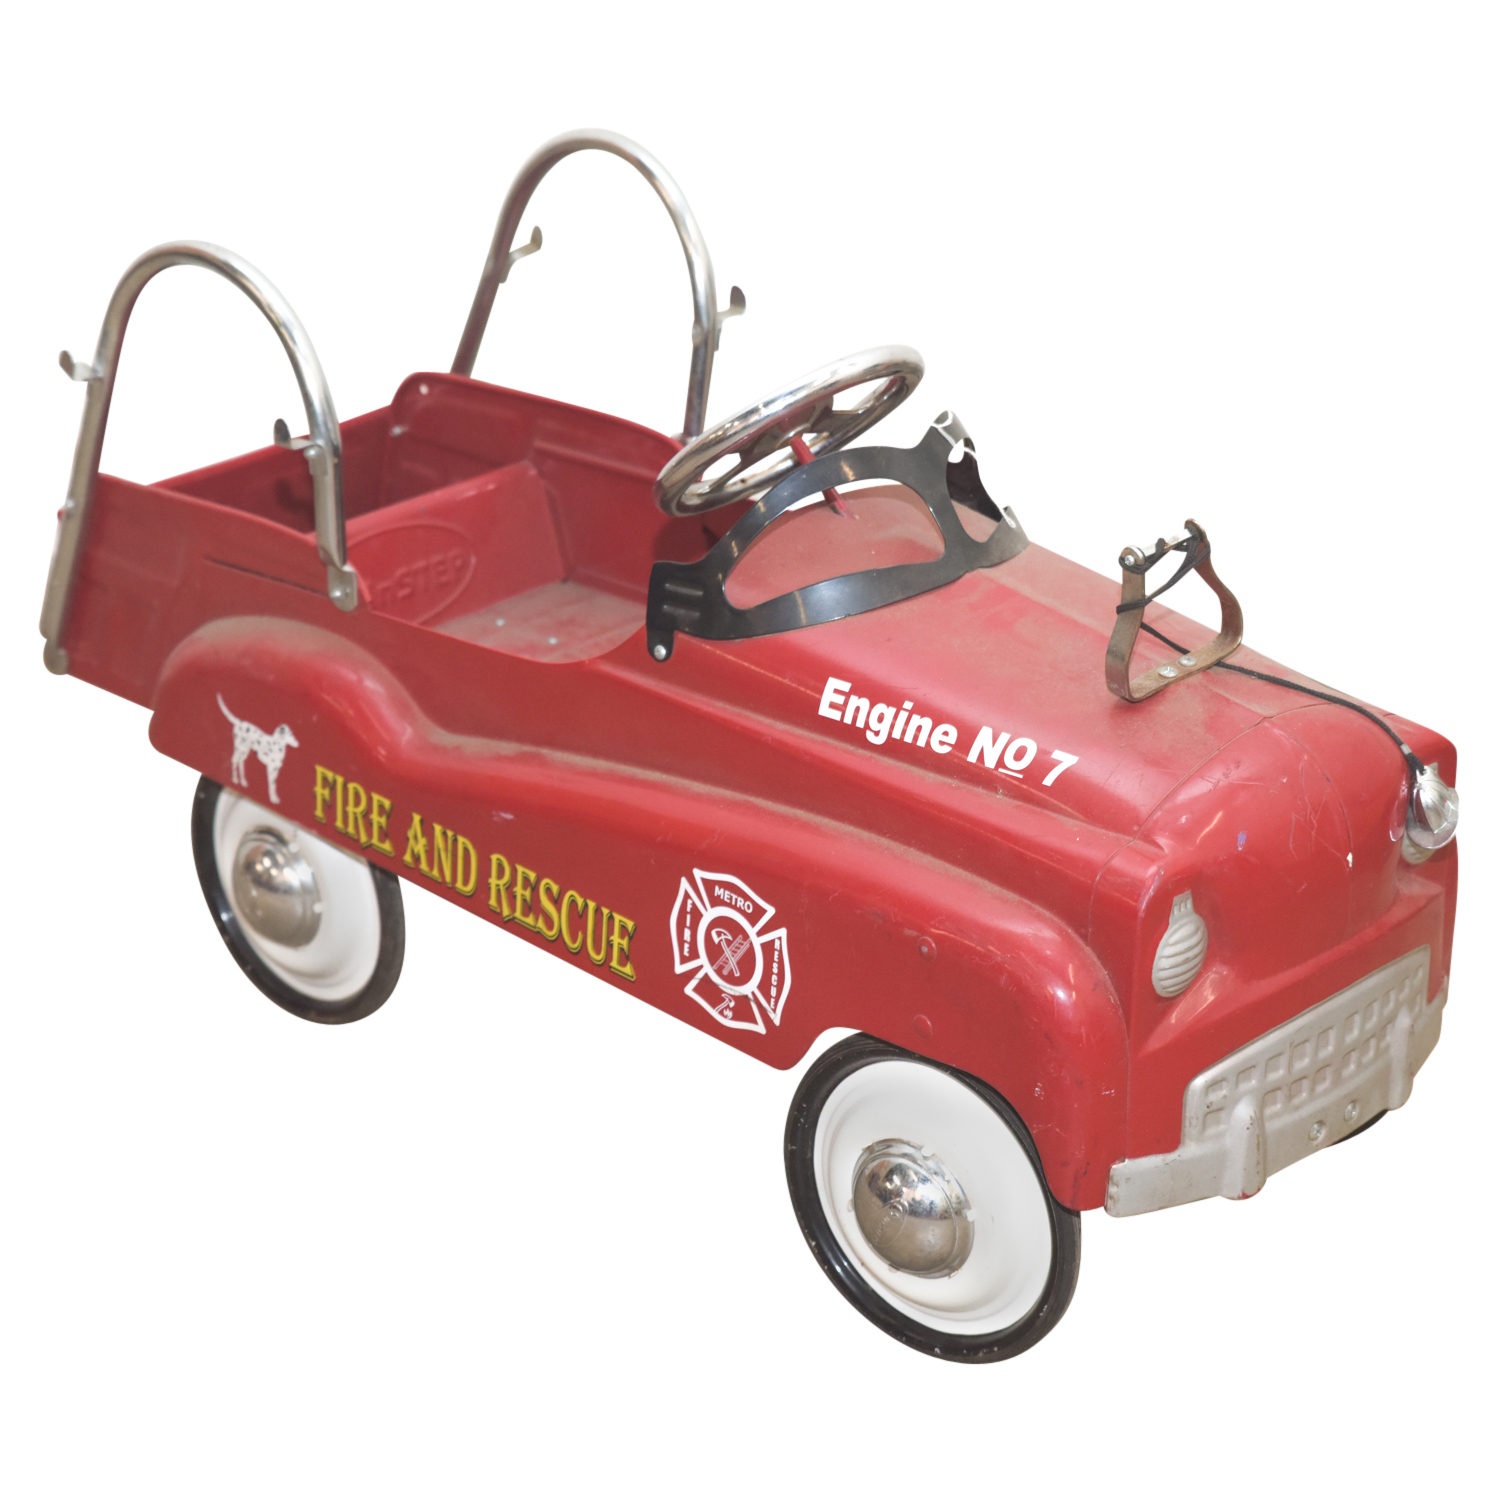 fire and rescue pedal car